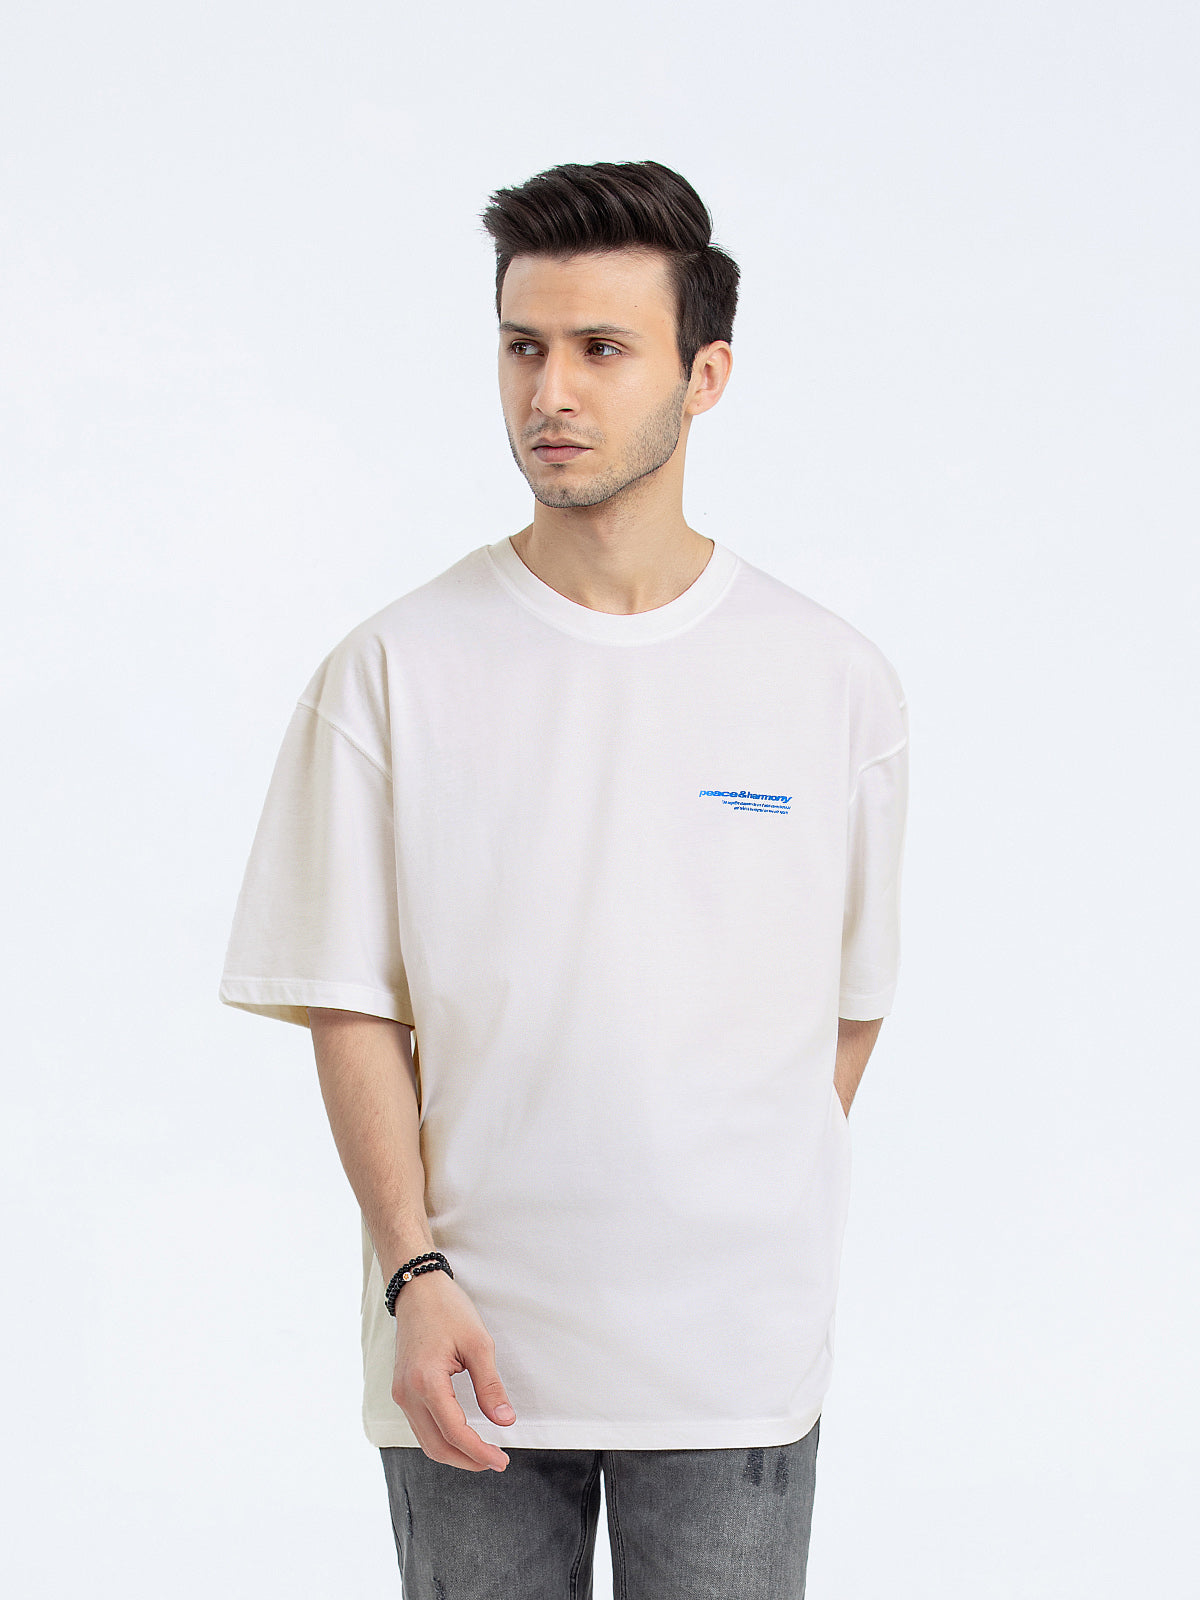 Relaxed Fit Graphic Tee - FMTGT24-020